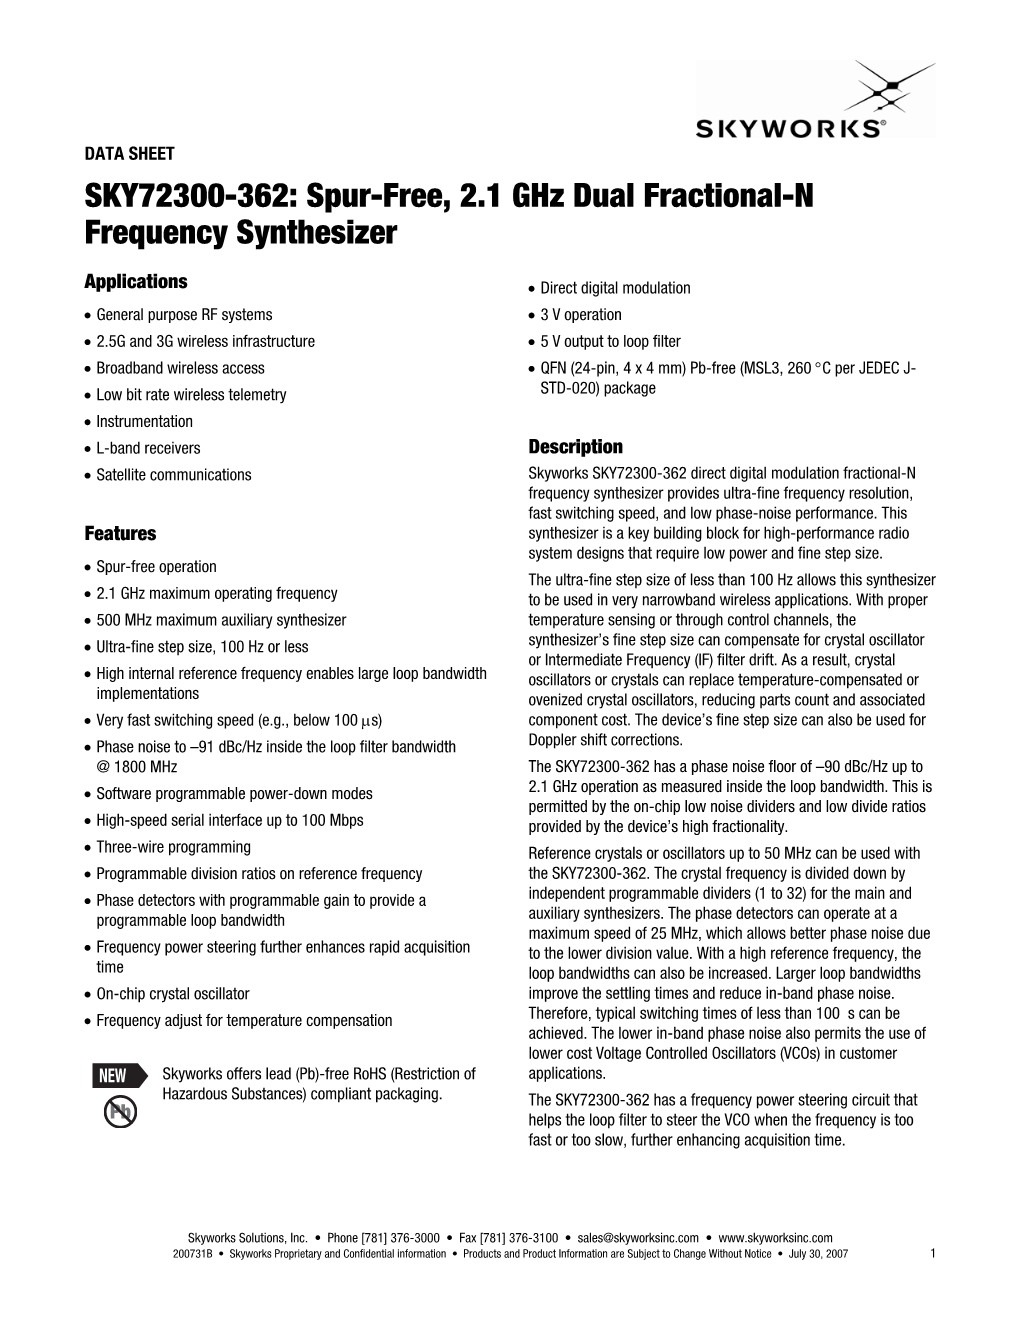 Data Sheets SKY72300-362 Spur-Free,2.1 Ghz Dual Fractional